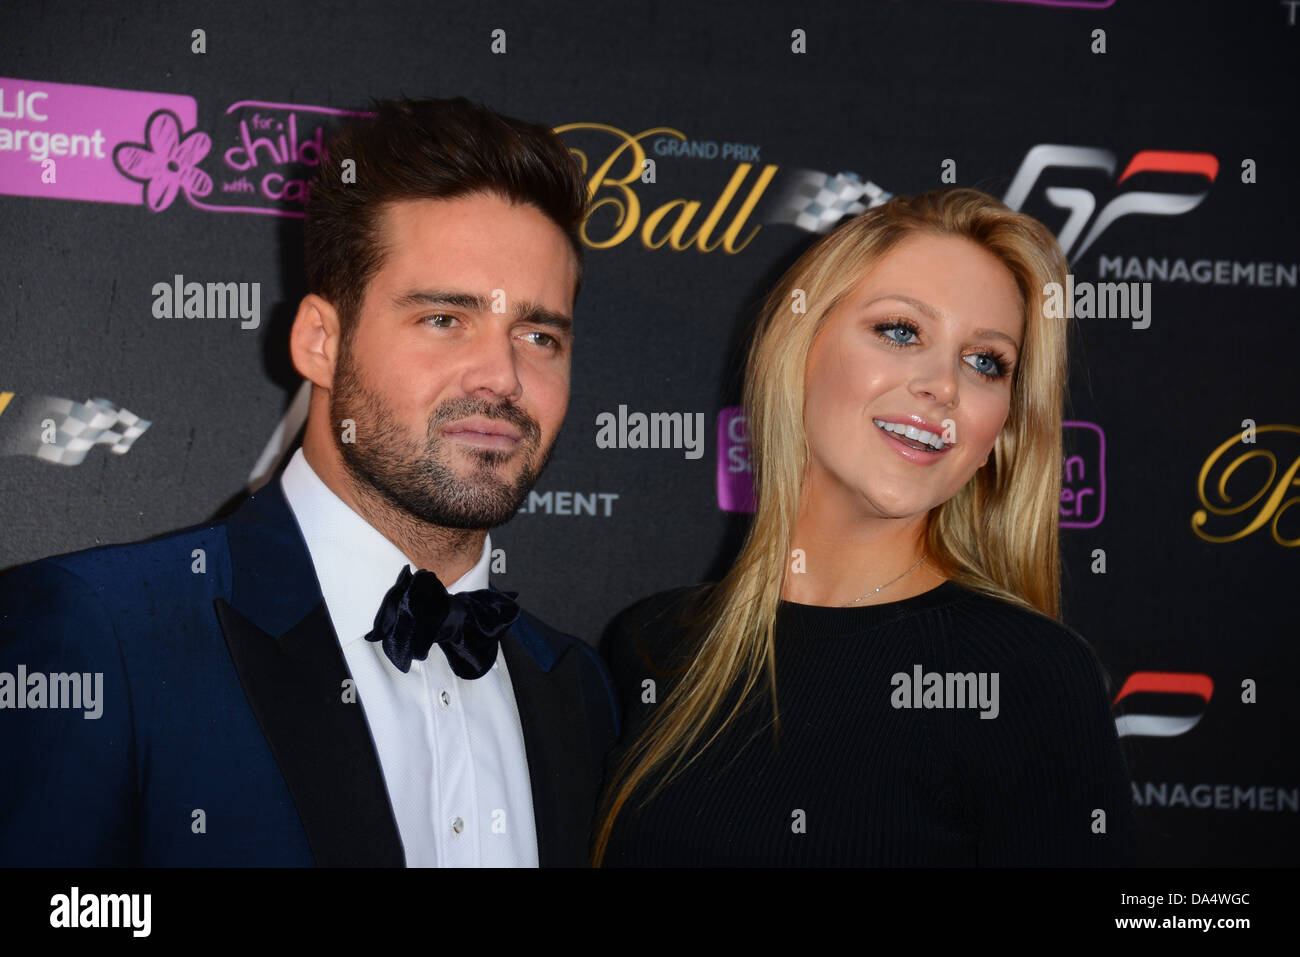 Spencer Matthews and a female guest arrive for the photocall at the Grand Prix Ball fundrises for children with cancer Stock Photo